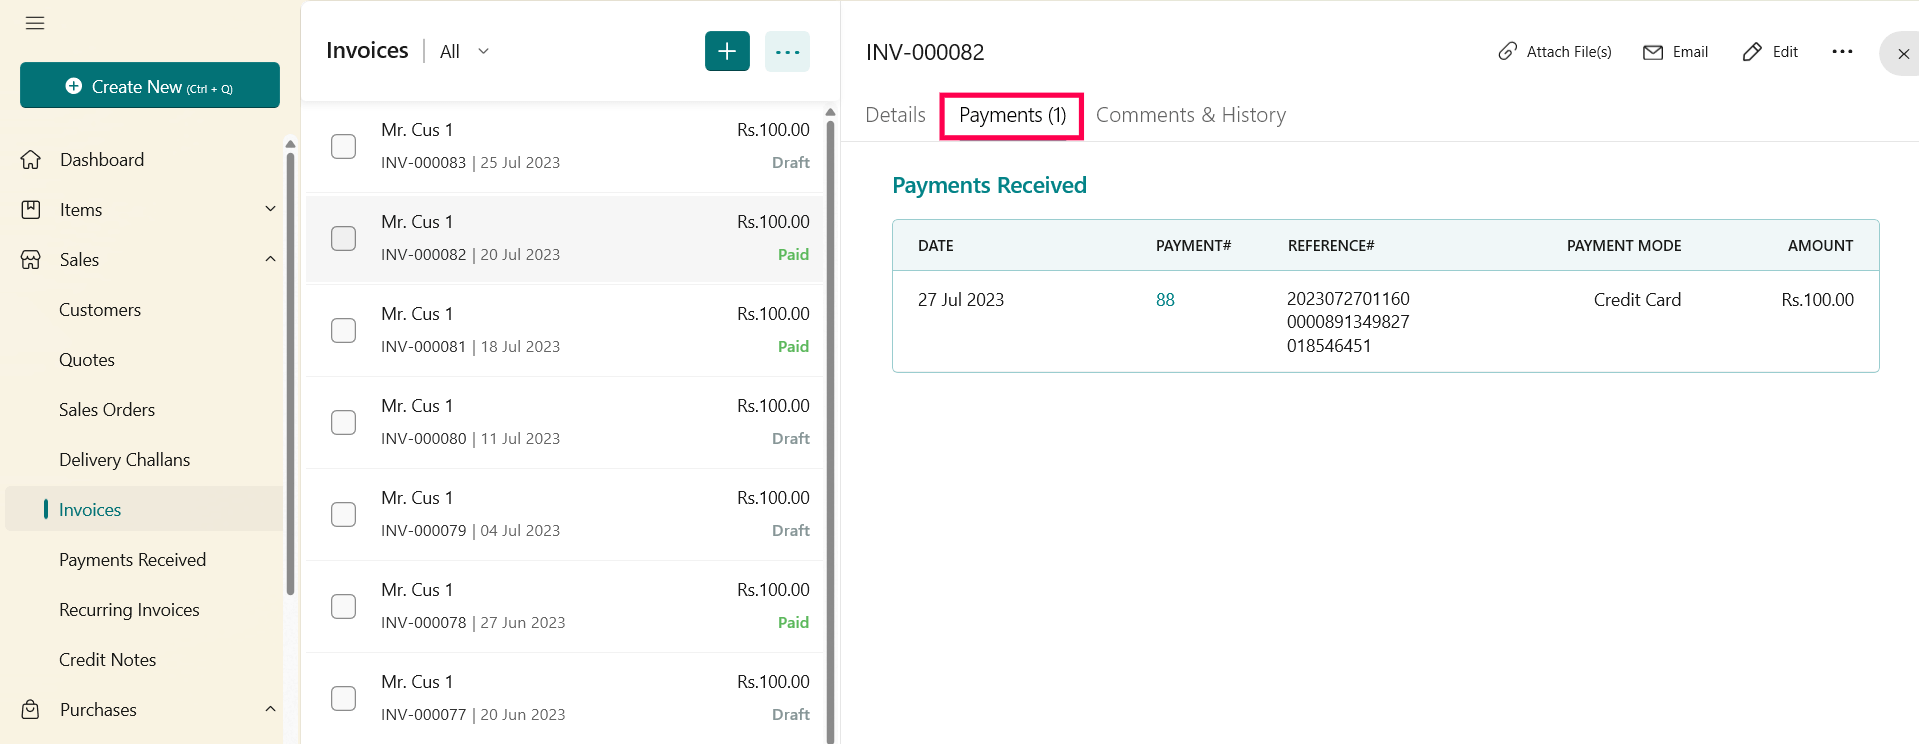 Payments Received Section